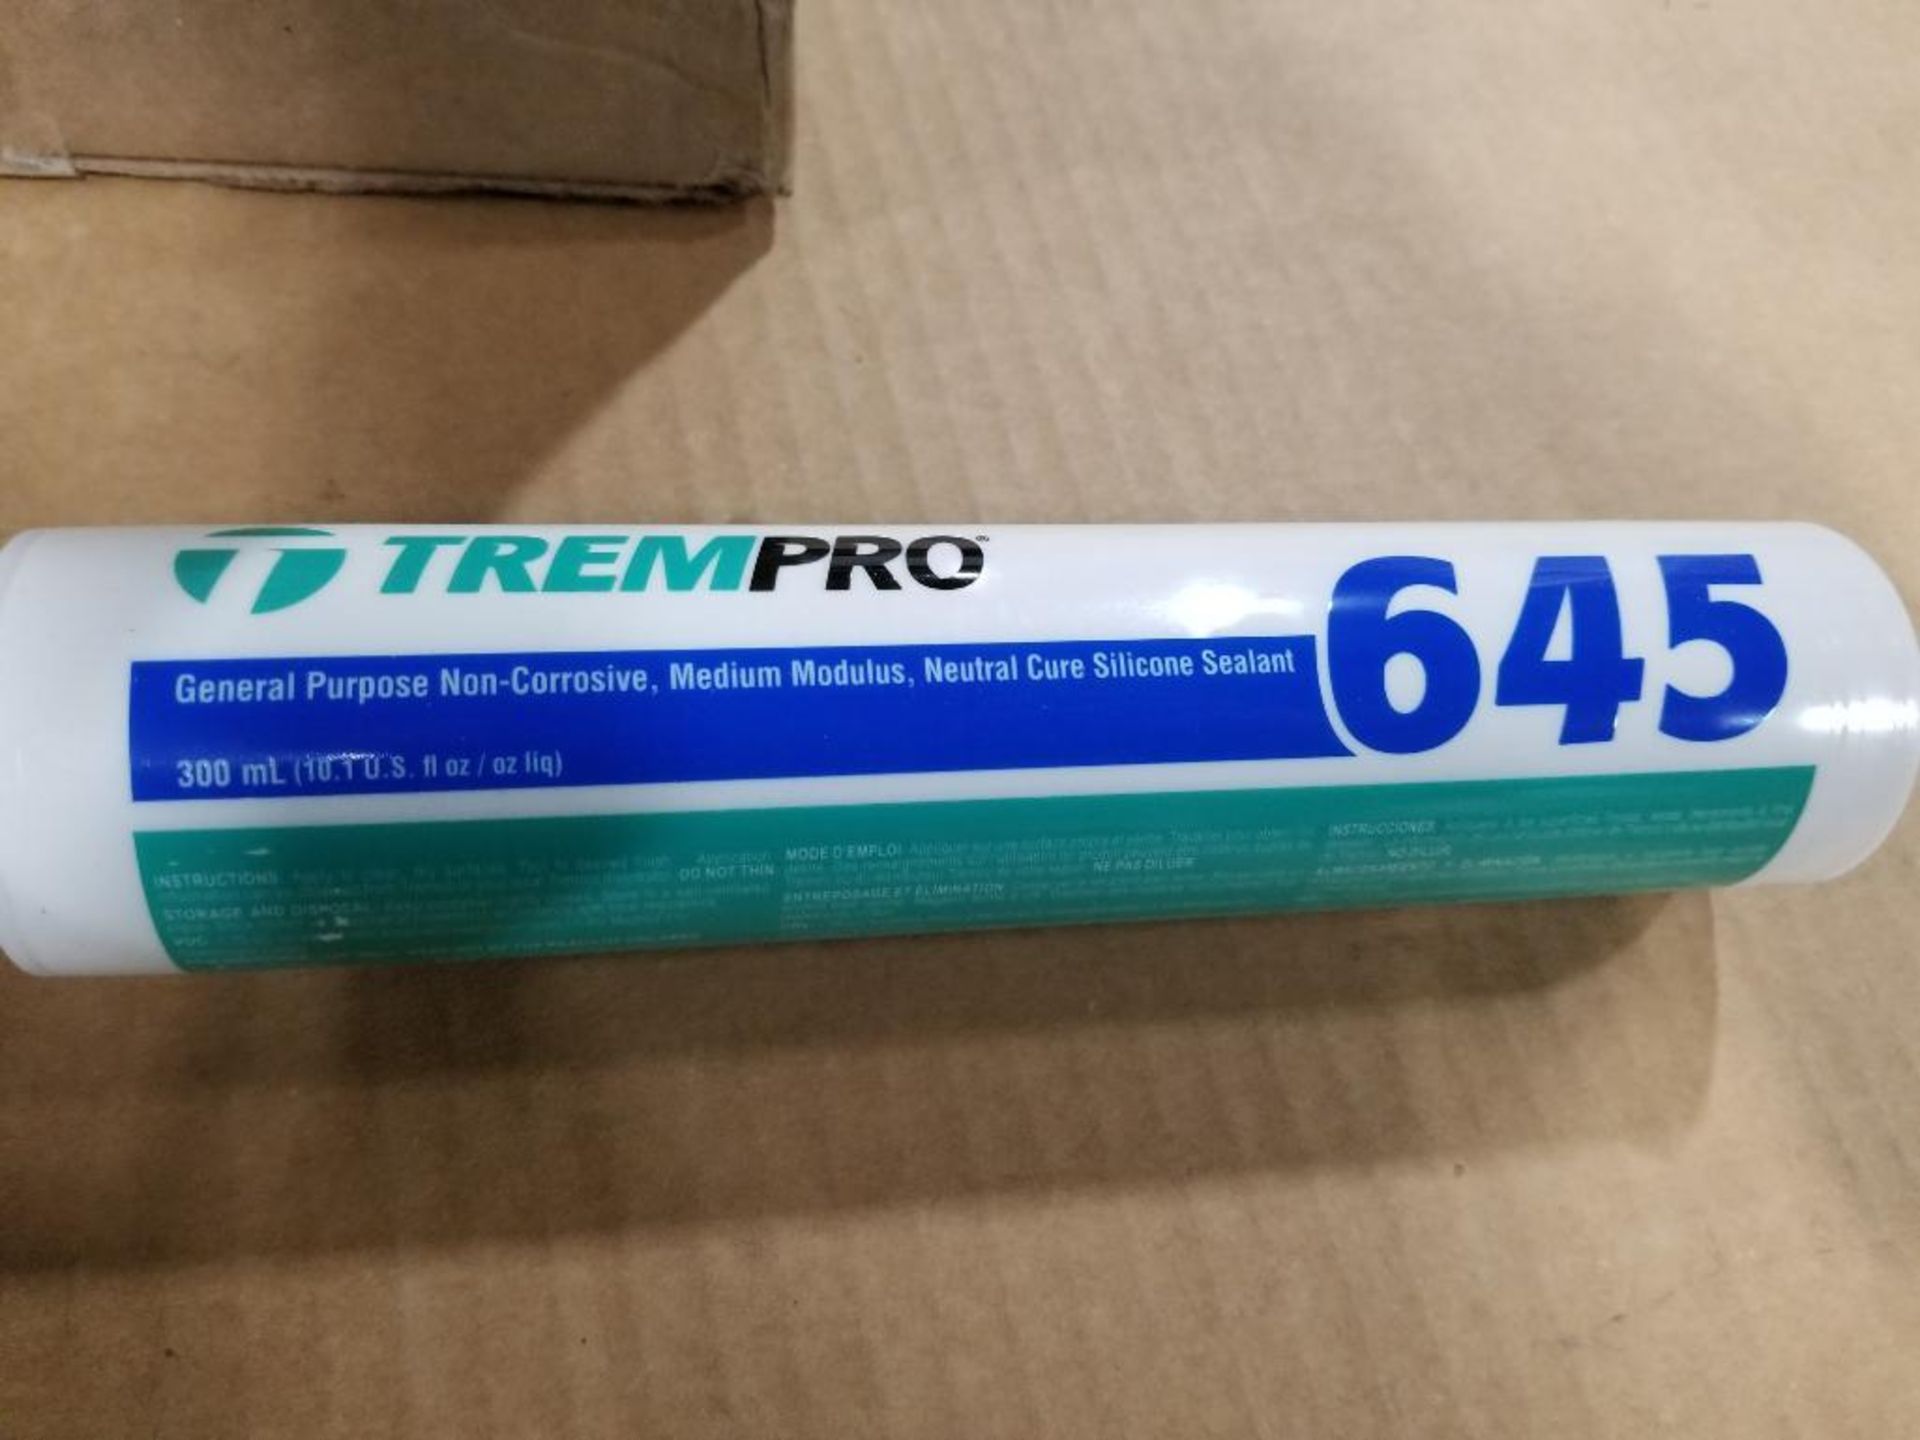 Qty 30 - TremPro silicone sealant. Part number 645. - Image 3 of 4